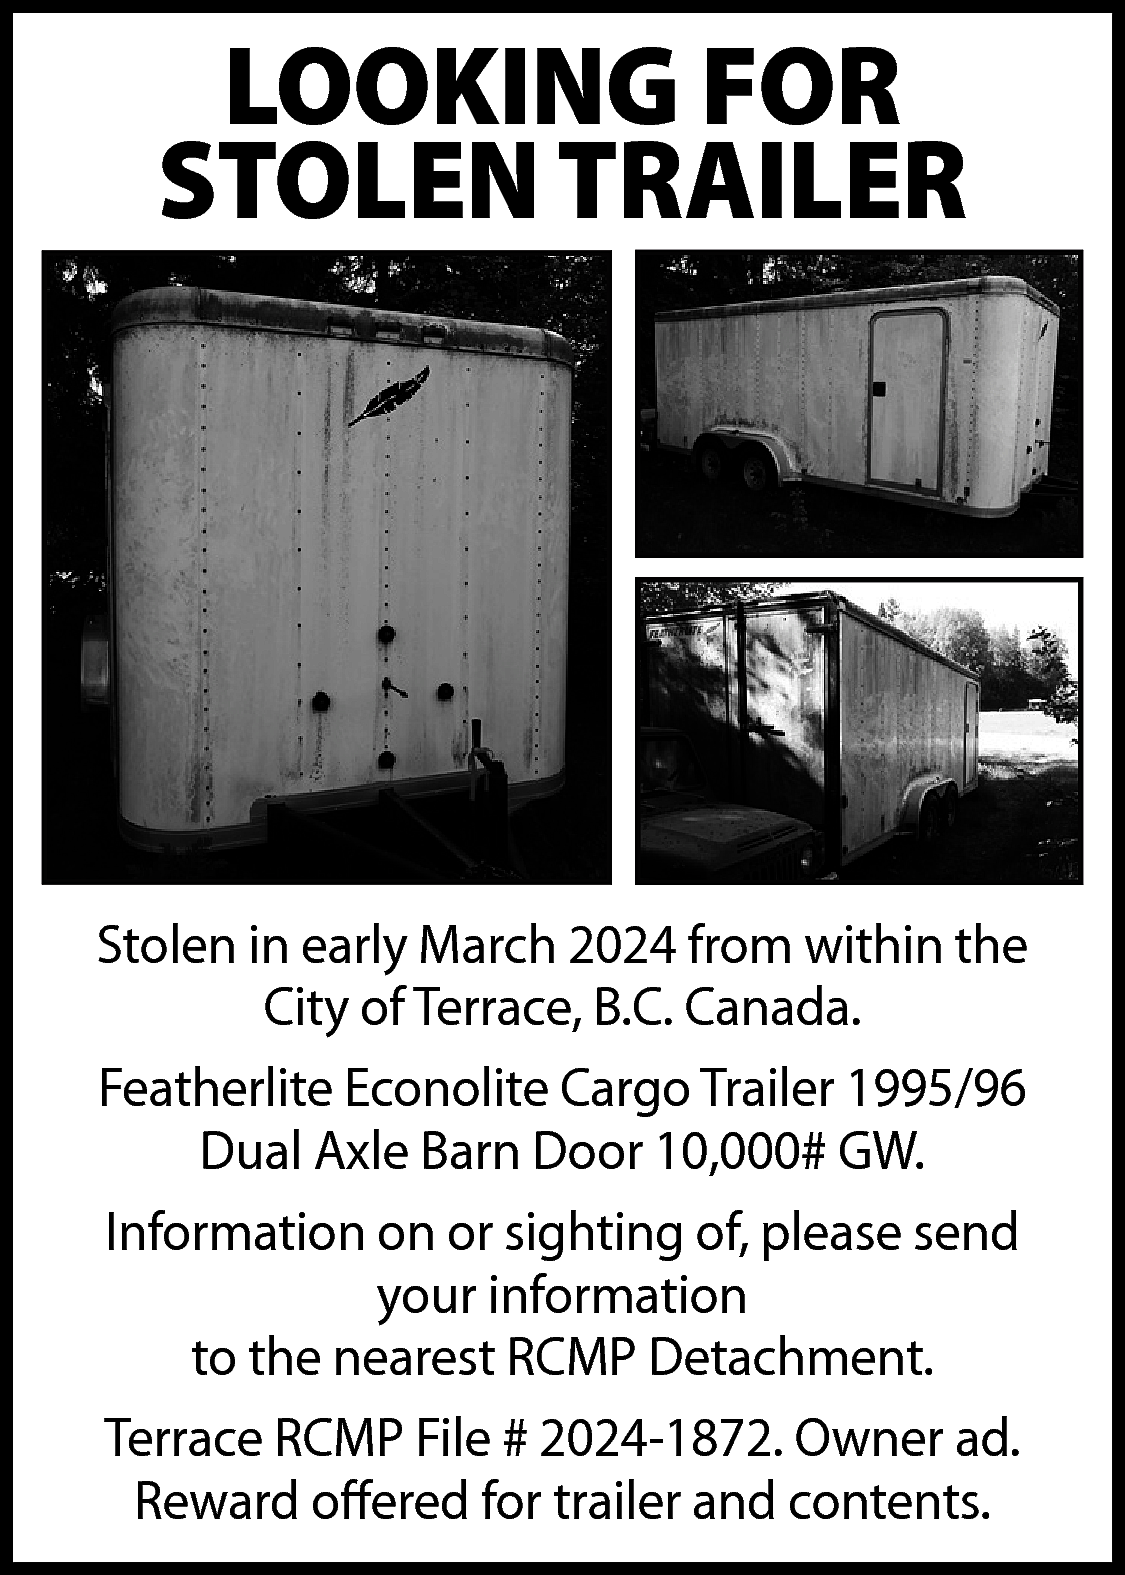 LOOKING FOR <br>STOLEN TRAILER <br>  LOOKING FOR  STOLEN TRAILER    Stolen in early March 2024 from within the  City of Terrace, B.C. Canada.  Featherlite Econolite Cargo Trailer 1995/96  Dual Axle Barn Door 10,000# GW.  Information on or sighting of, please send  your information  to the nearest RCMP Detachment.  Terrace RCMP File # 2024-1872. Owner ad.  Reward offered for trailer and contents.    